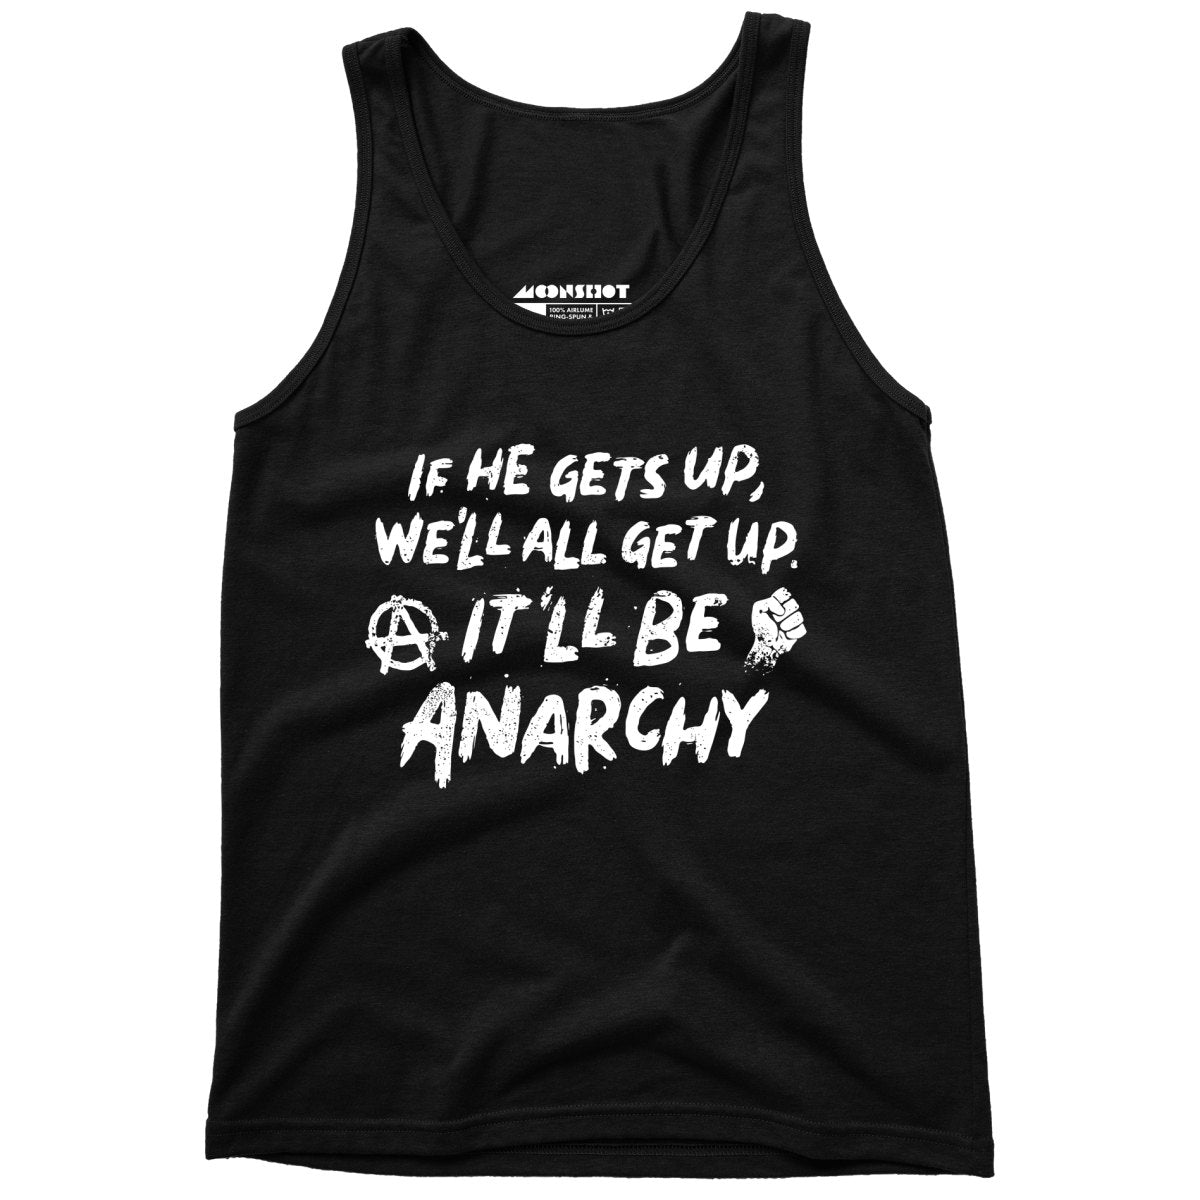 It'll Be Anarchy - Unisex Tank Top